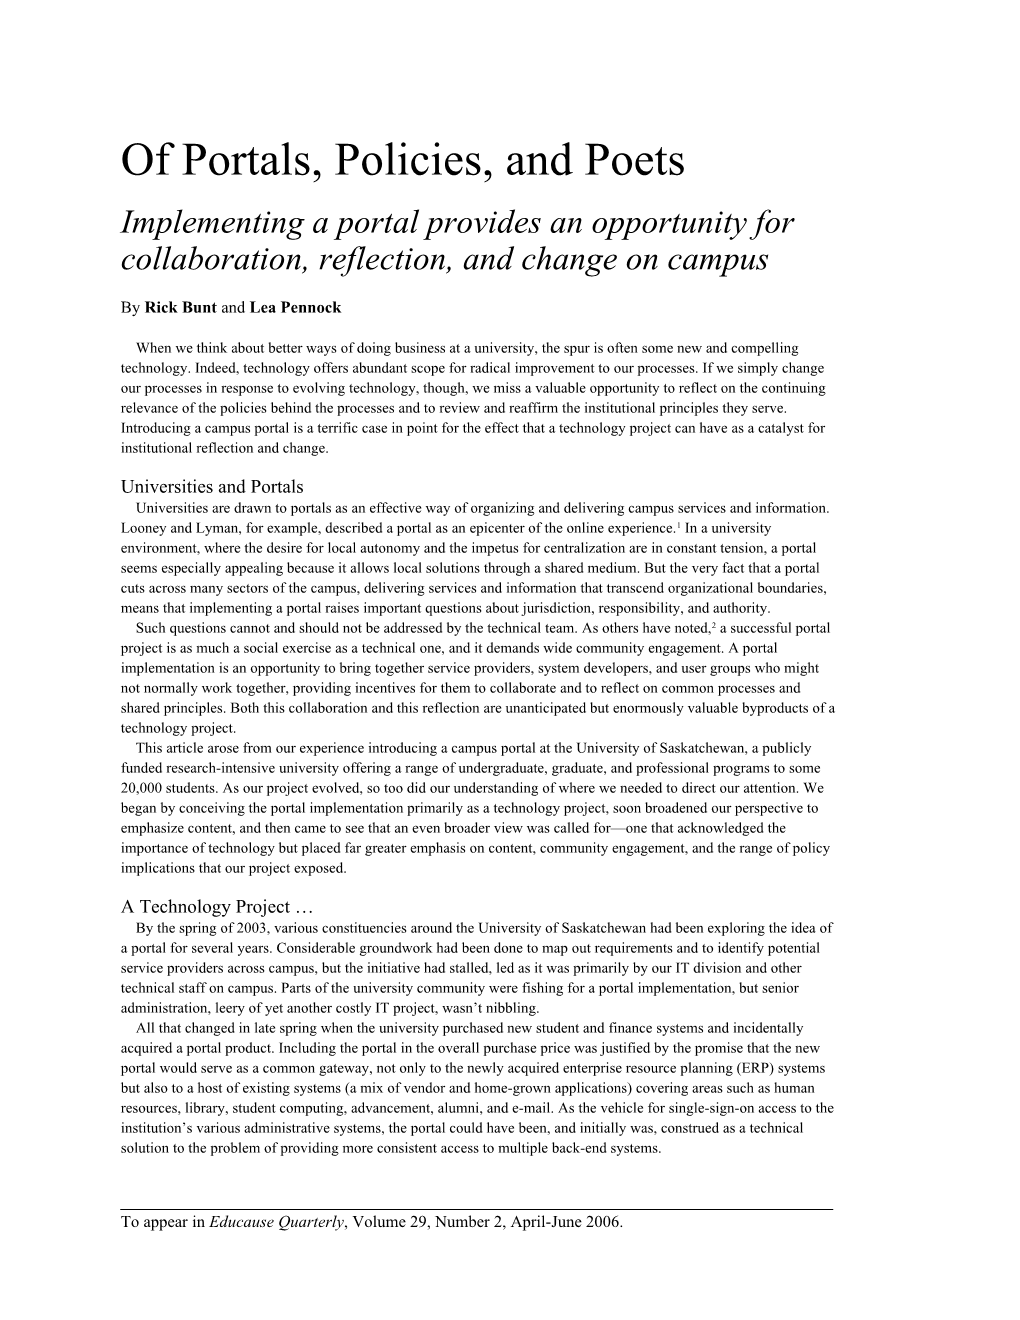 Of Portals, Policies and Poets